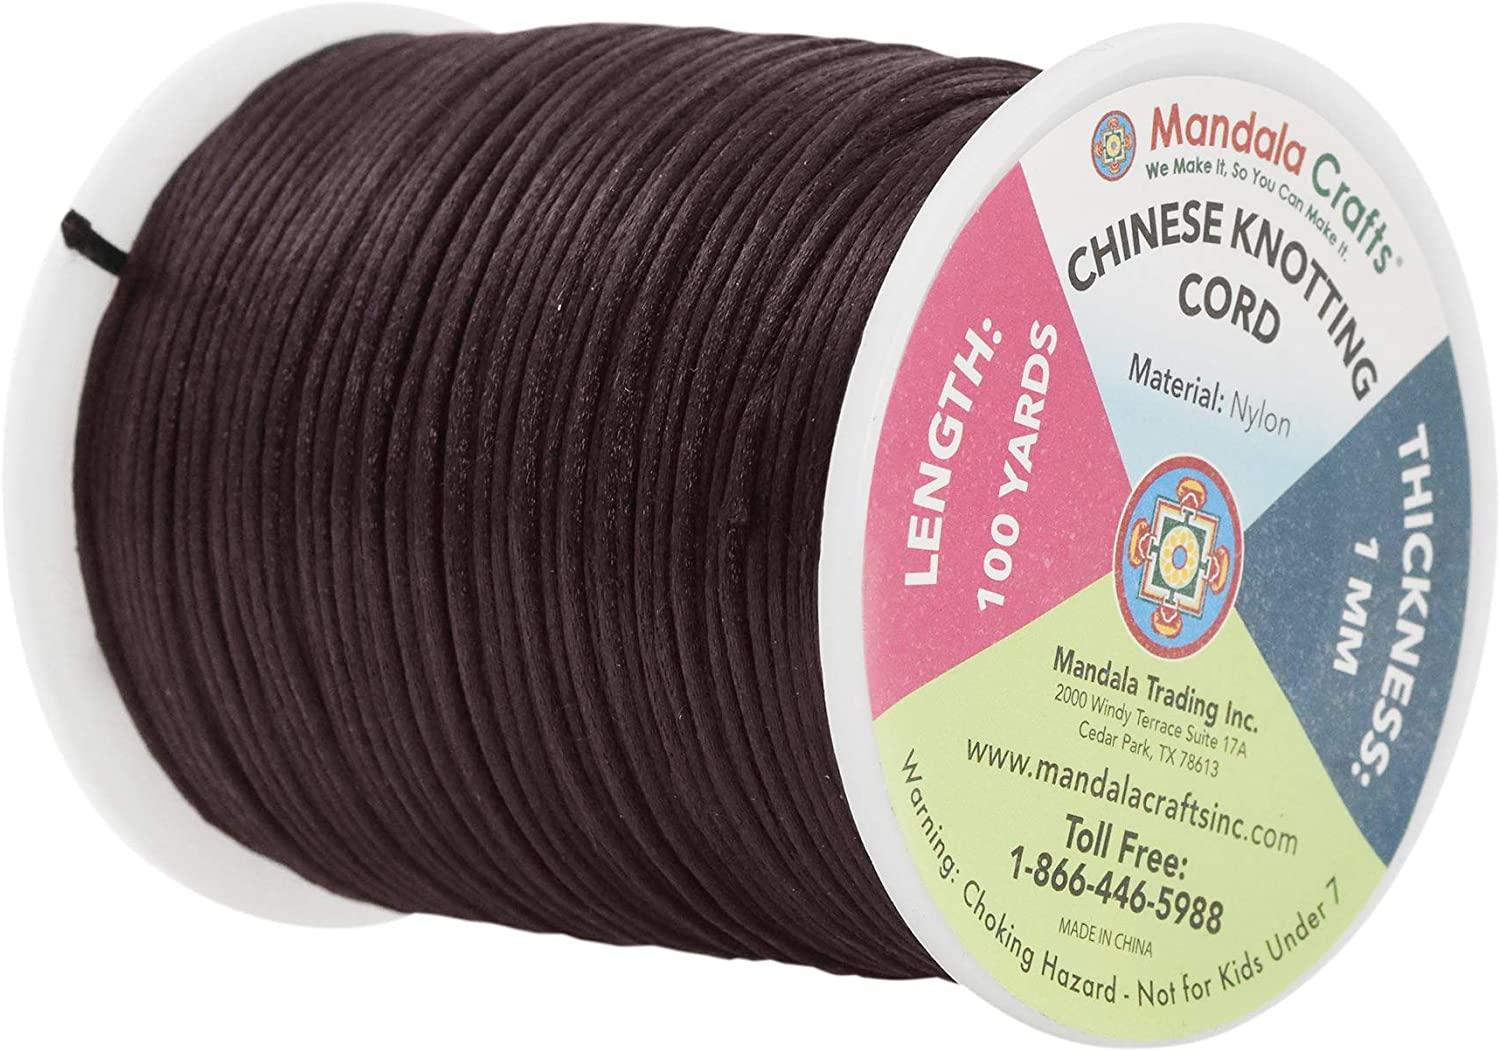 Mandala Crafts Size 2mm Black Waxed Cord for Jewelry Making - 109 Yds Black  Waxed Cotton Cord for Jewelry String Bracelet Cord W